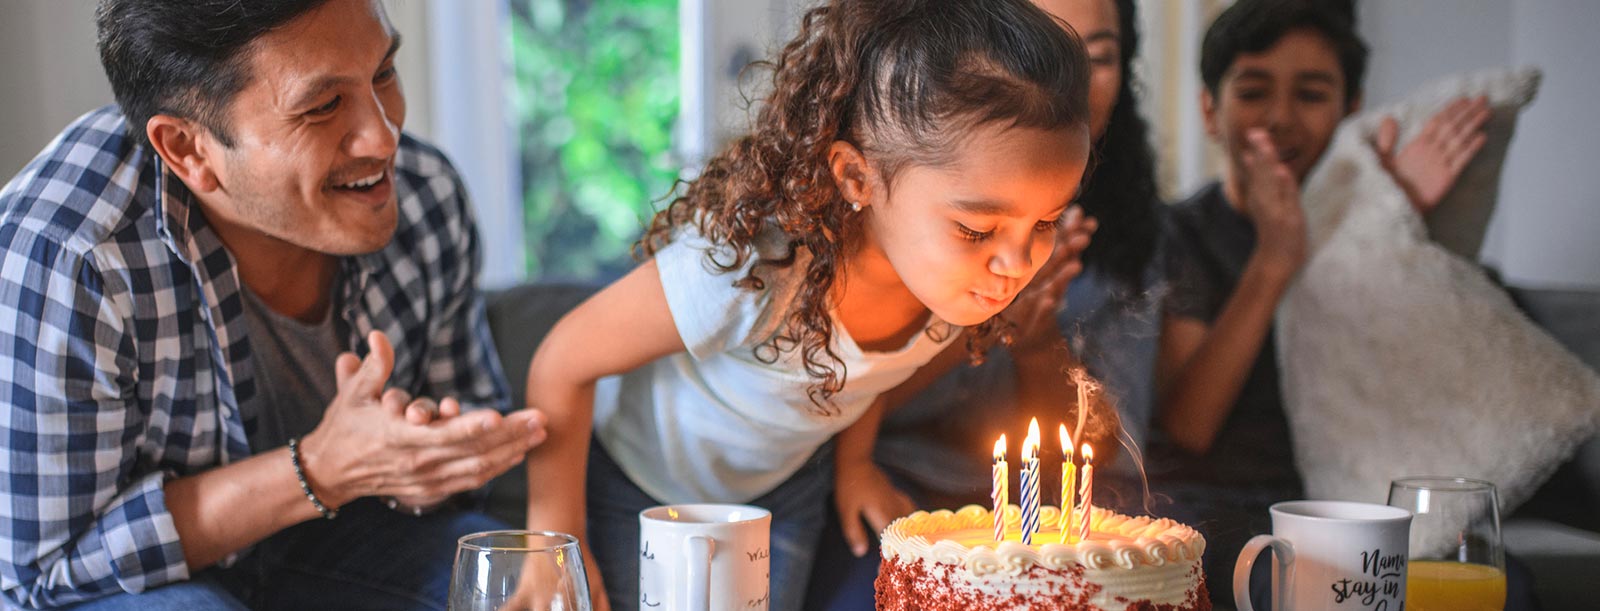 Girl blowing out birthday candles at home with family.